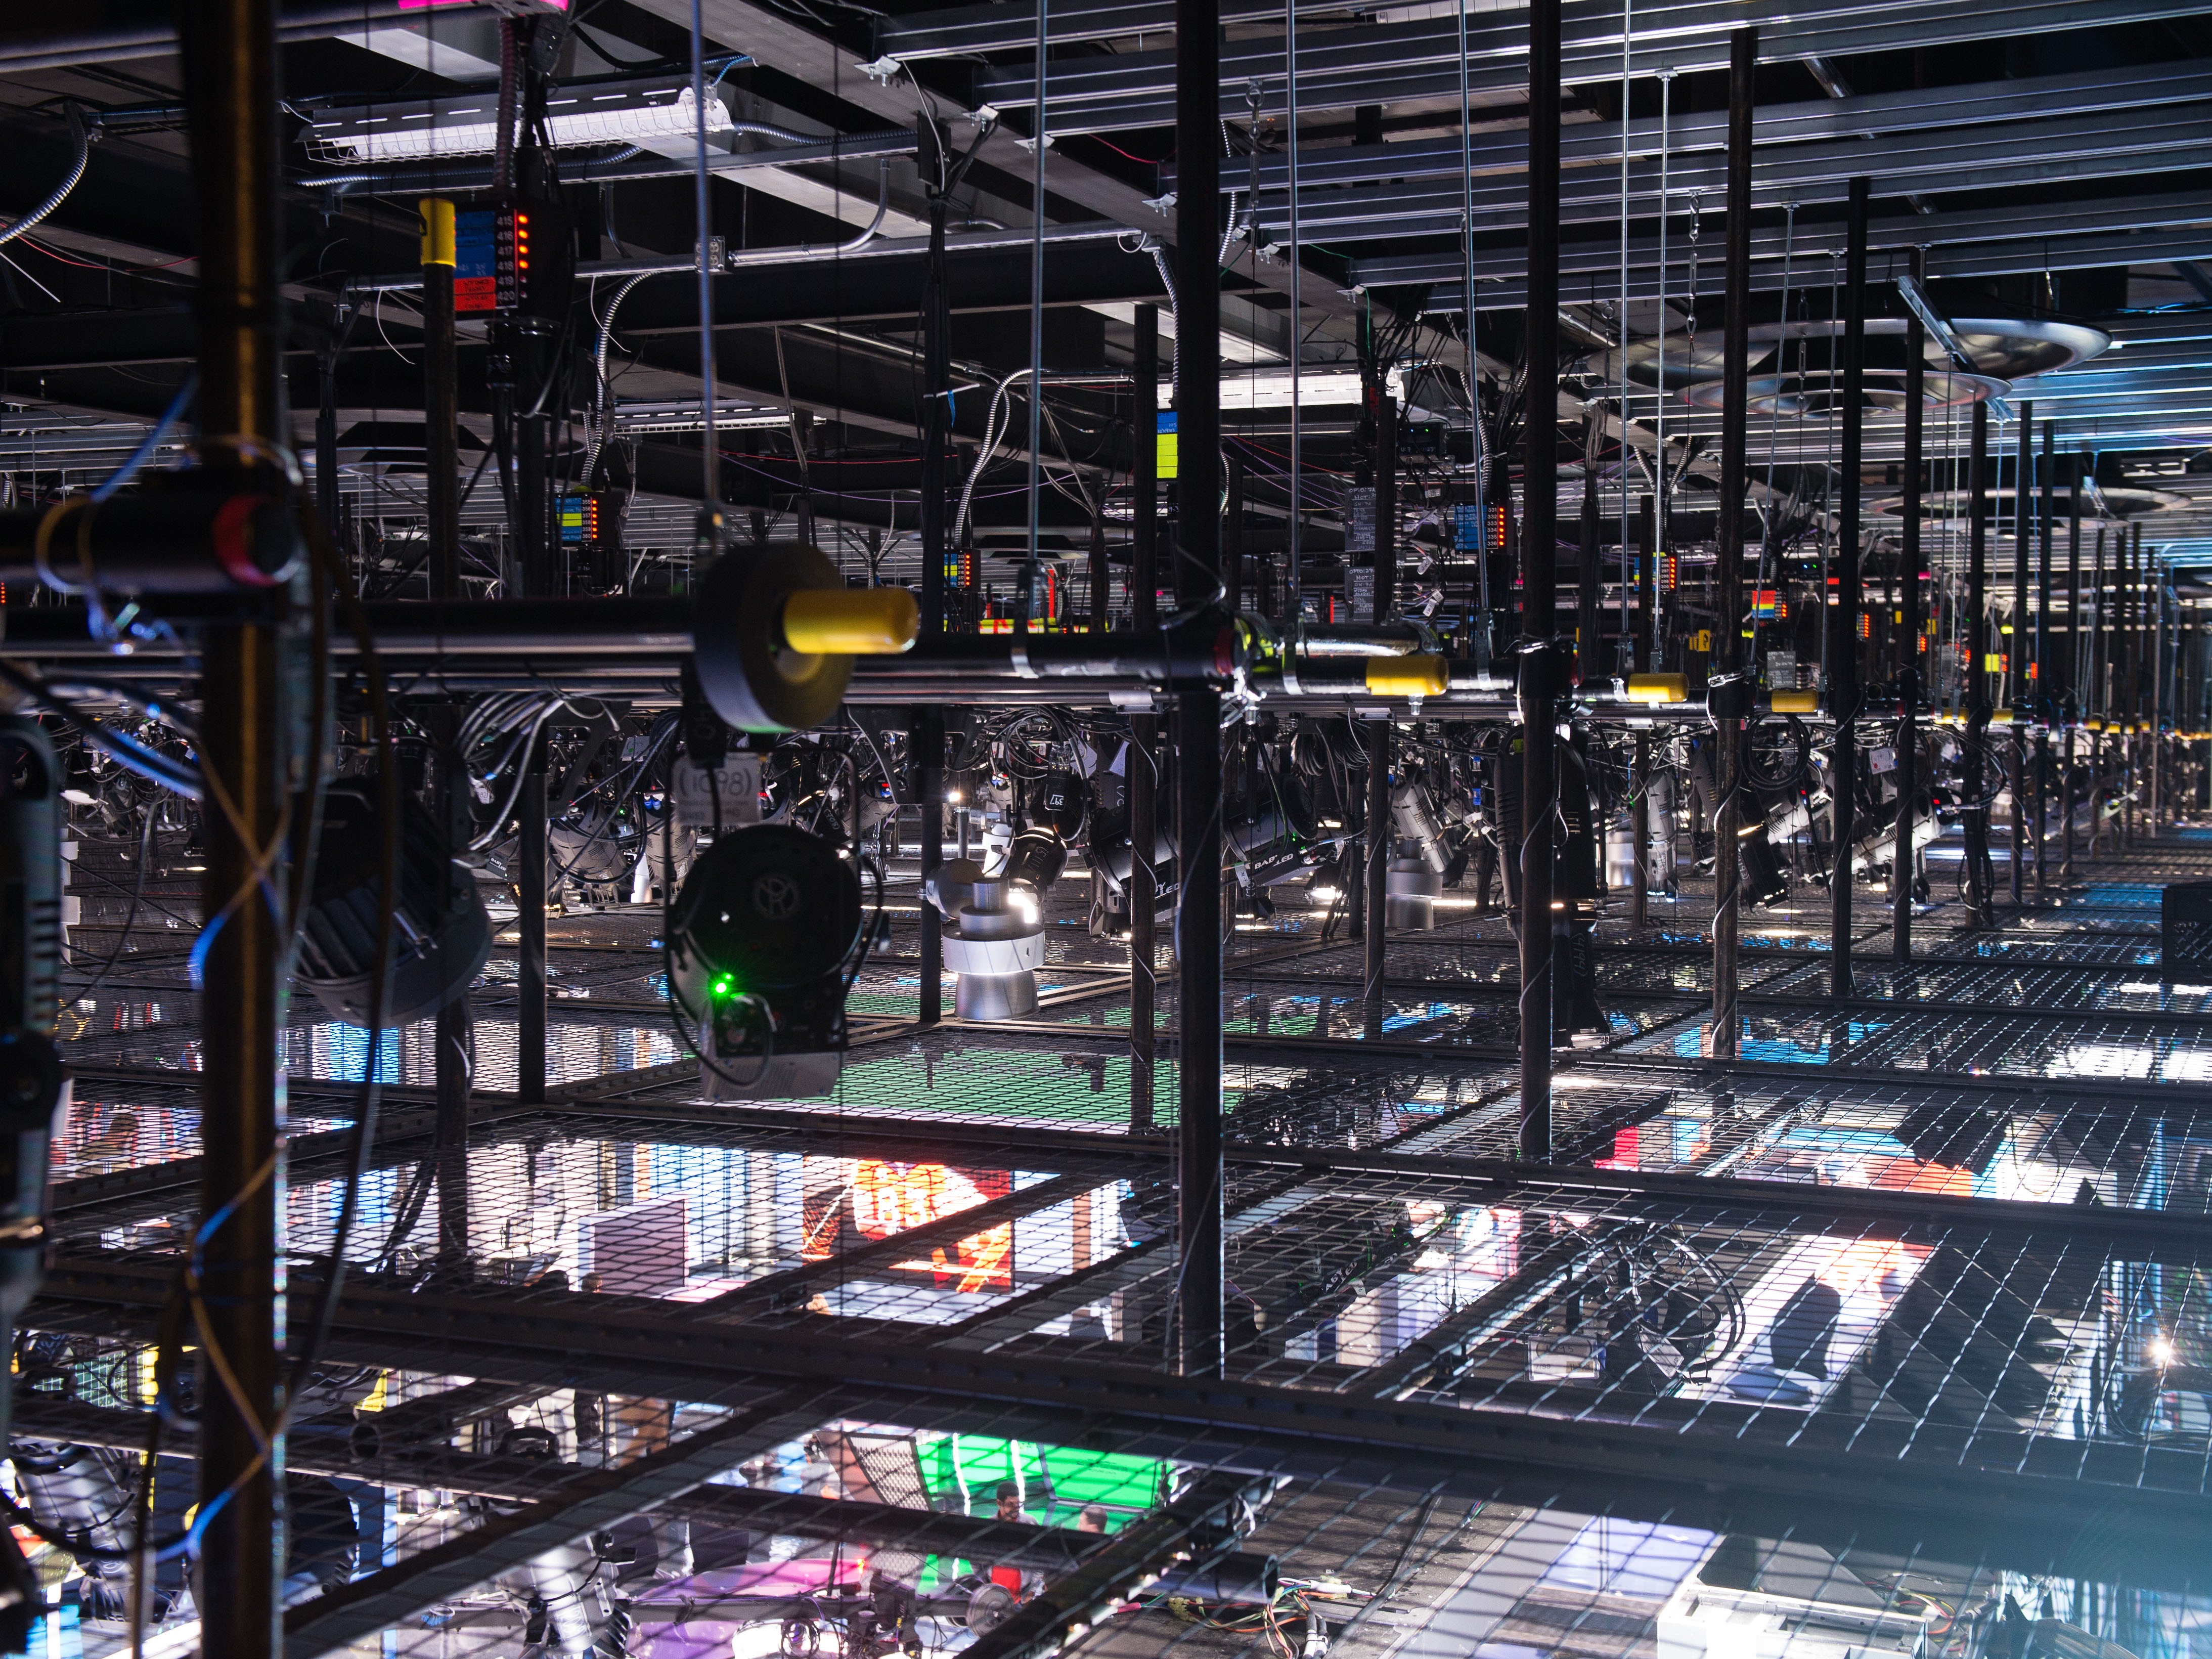 About 90 percent of the nearly 1000 lights used in the new studio are high-end LED models. (Joe Faraoni / ESPN Images)